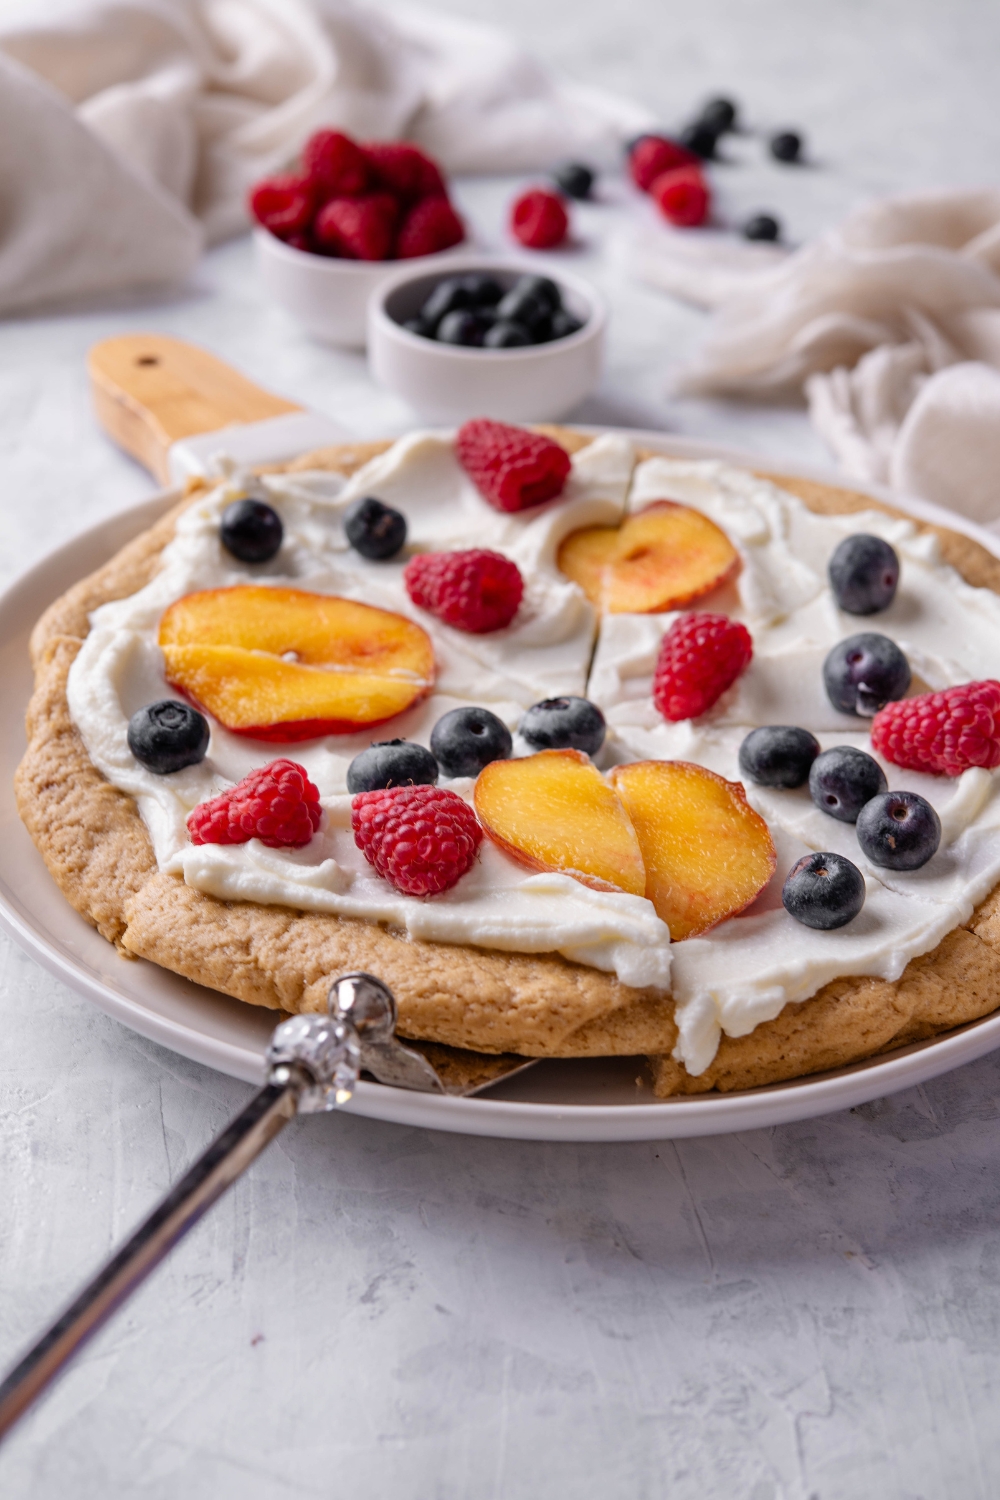 A plate with fruit pizza sliced and ready to serve with a spatula underneath a slice.